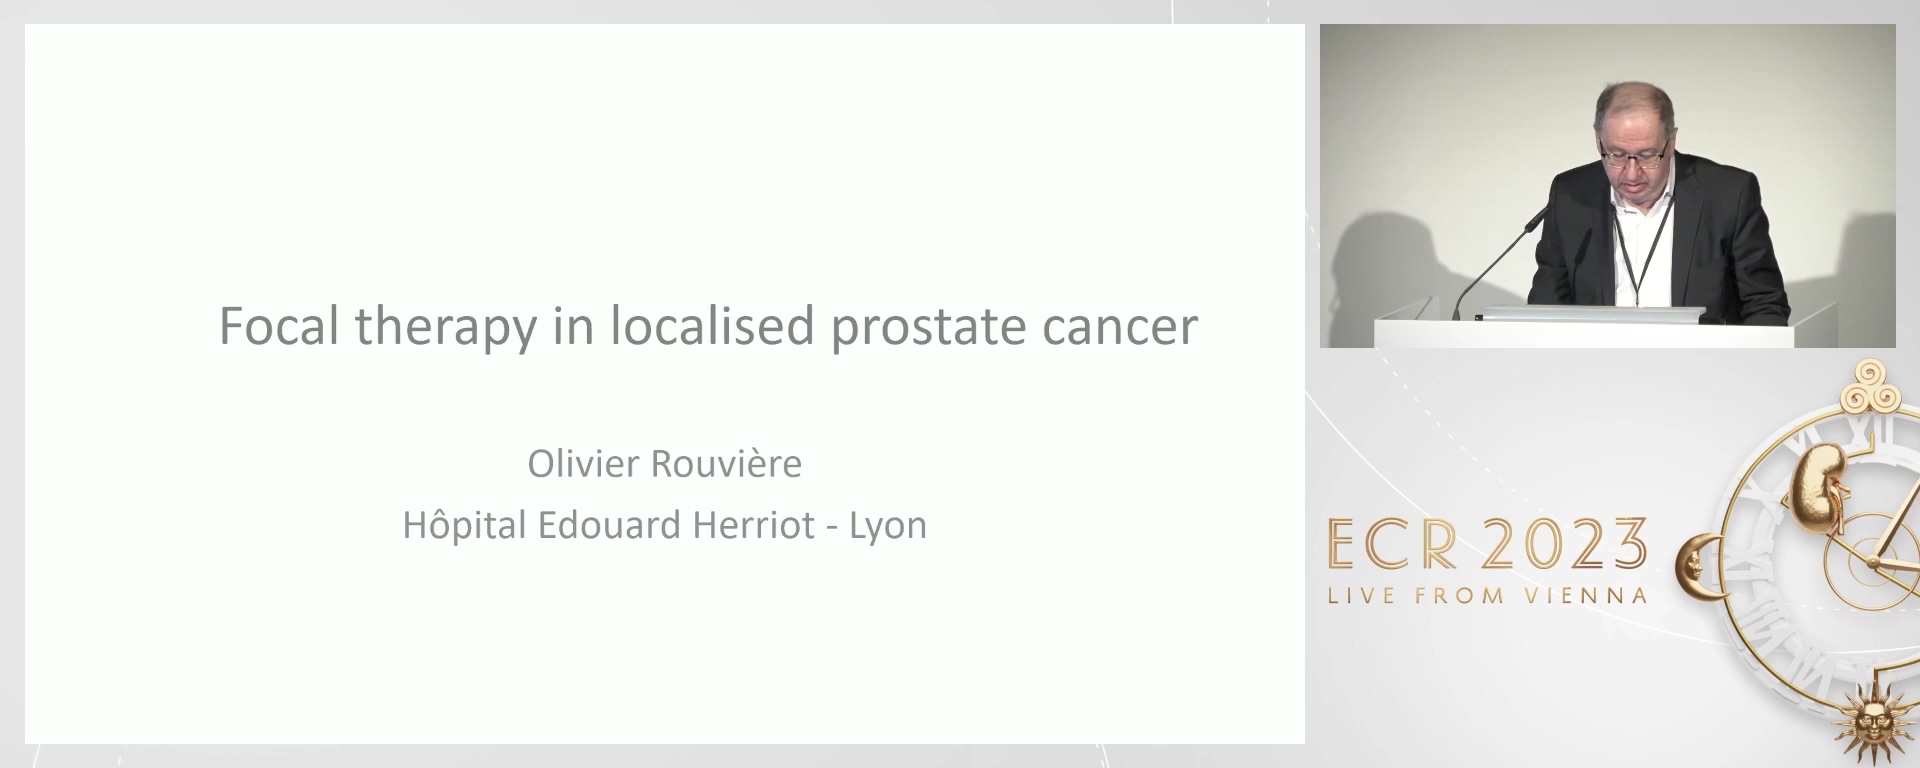 Focal therapy in localised prostate cancer: IRE, HIFU, cryoablation